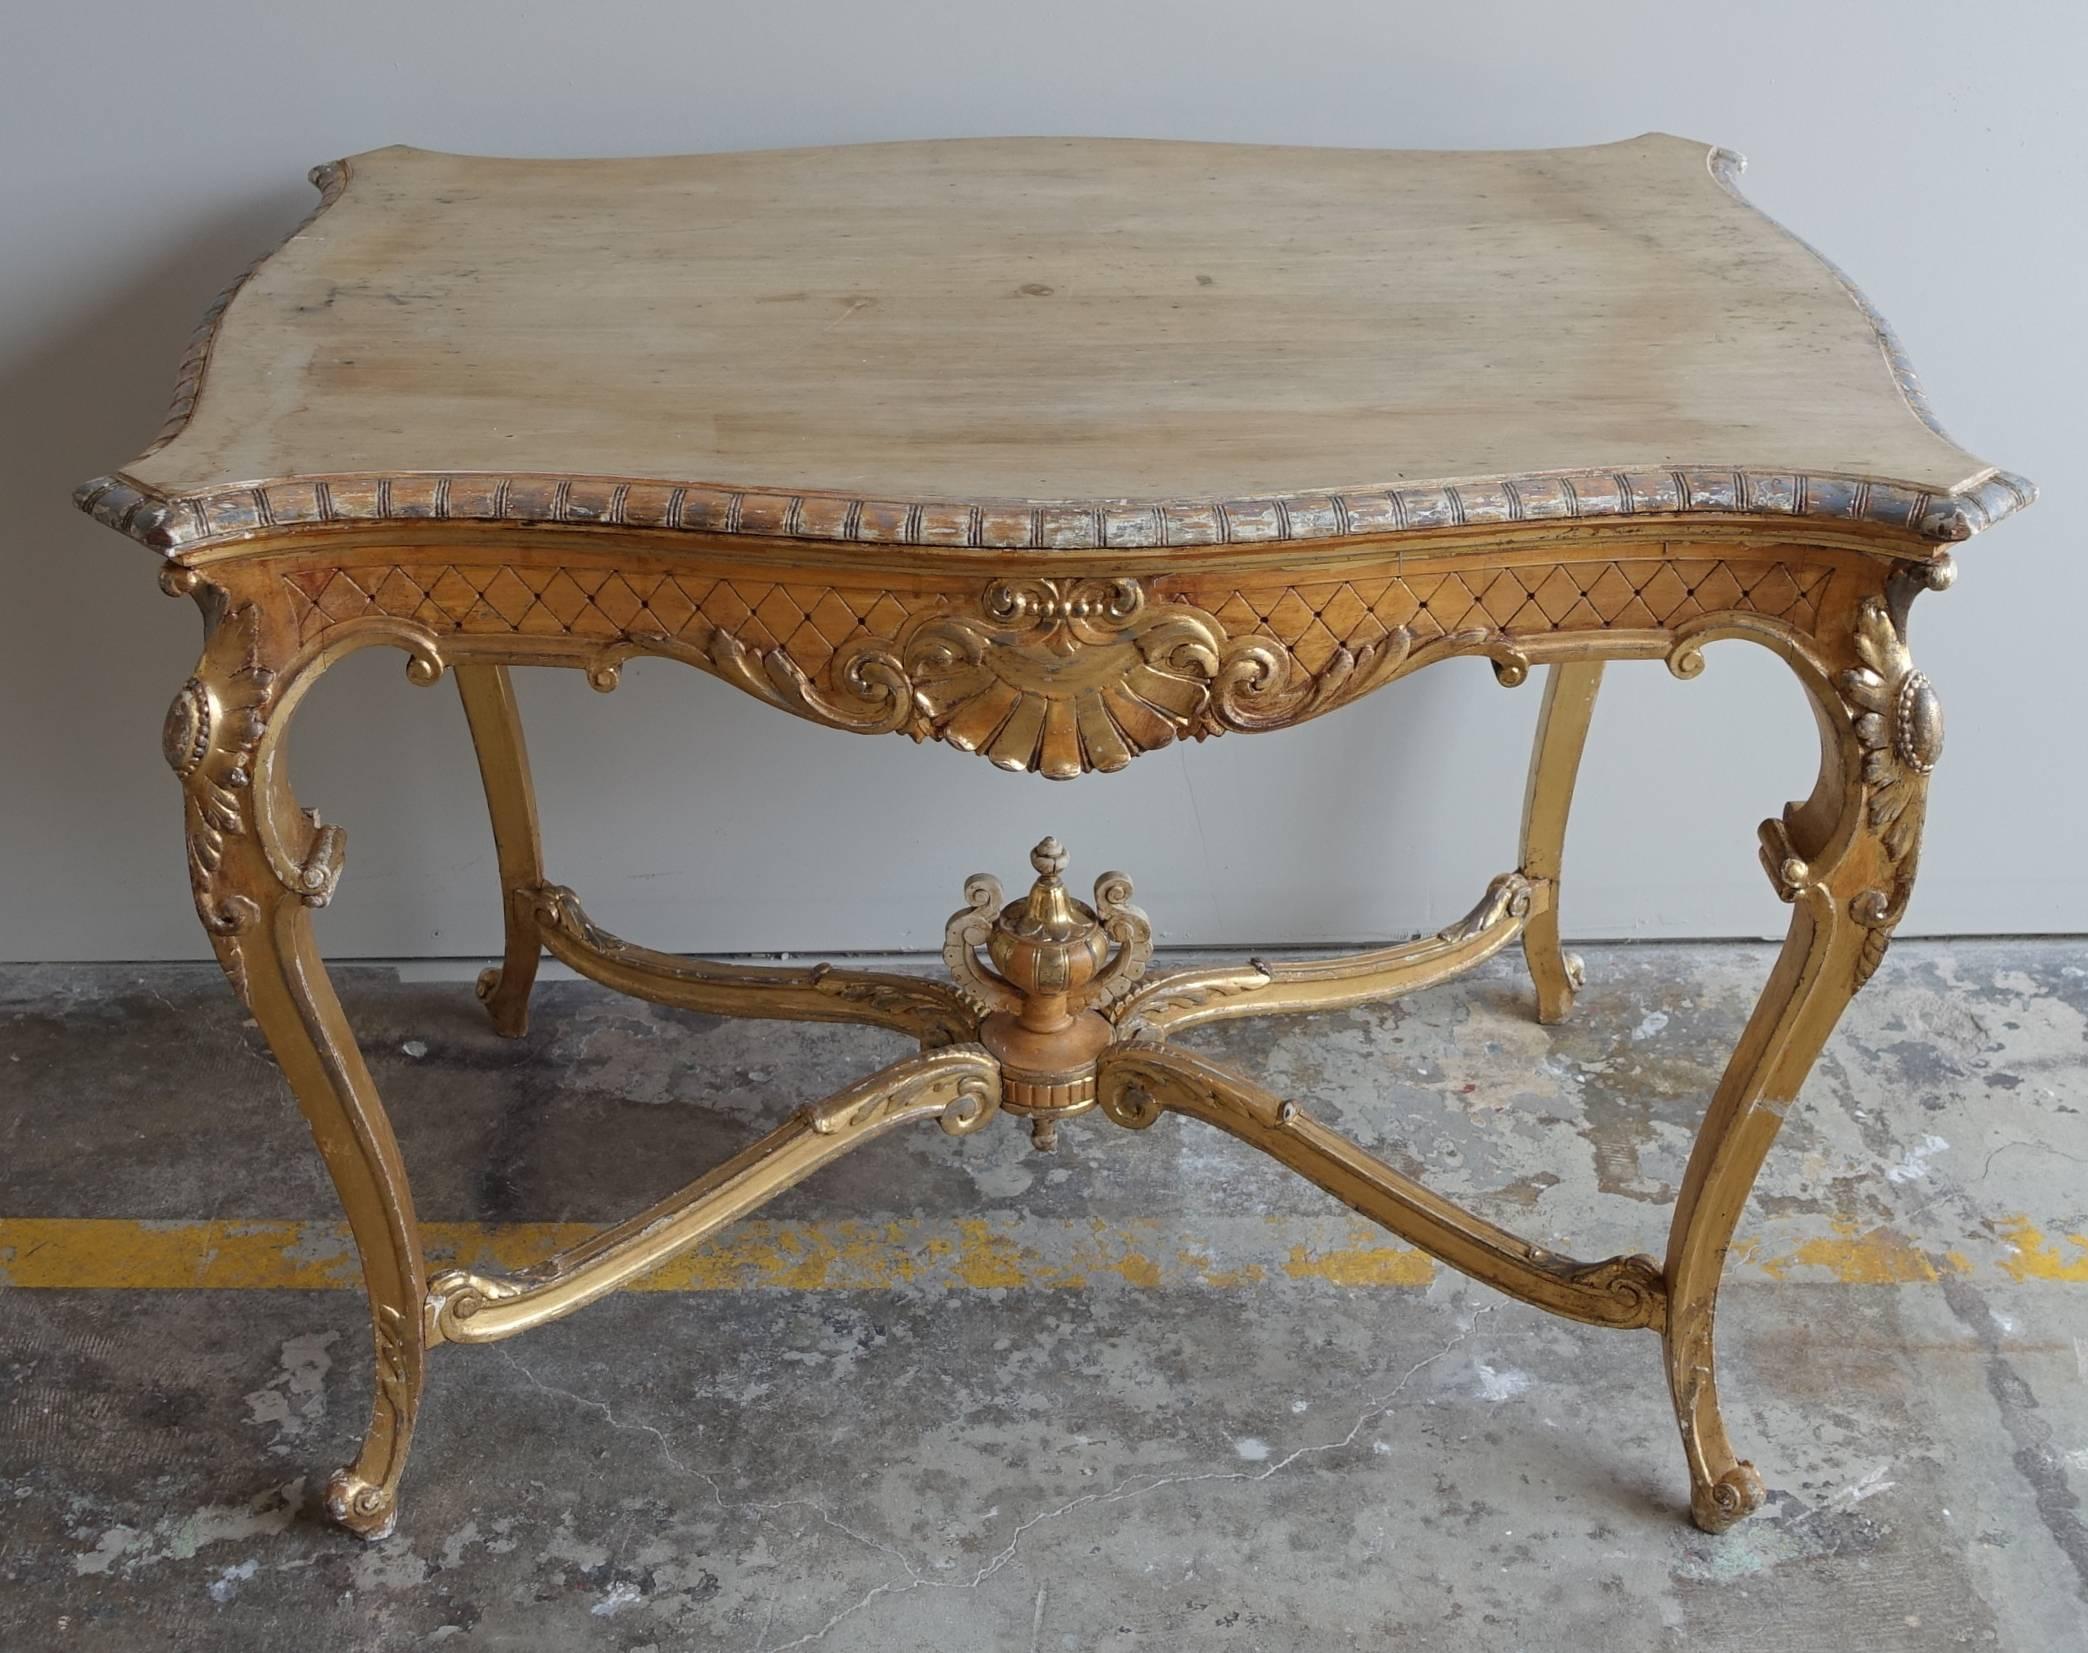 19th century French Louis XV style wood table standing on four cabriole legs that turn into rams head feet. Four acanthus leaf decorated stretchers meet at a center urn. The cabriole leg is adorned with a carved sunflower on all four corners. Shell